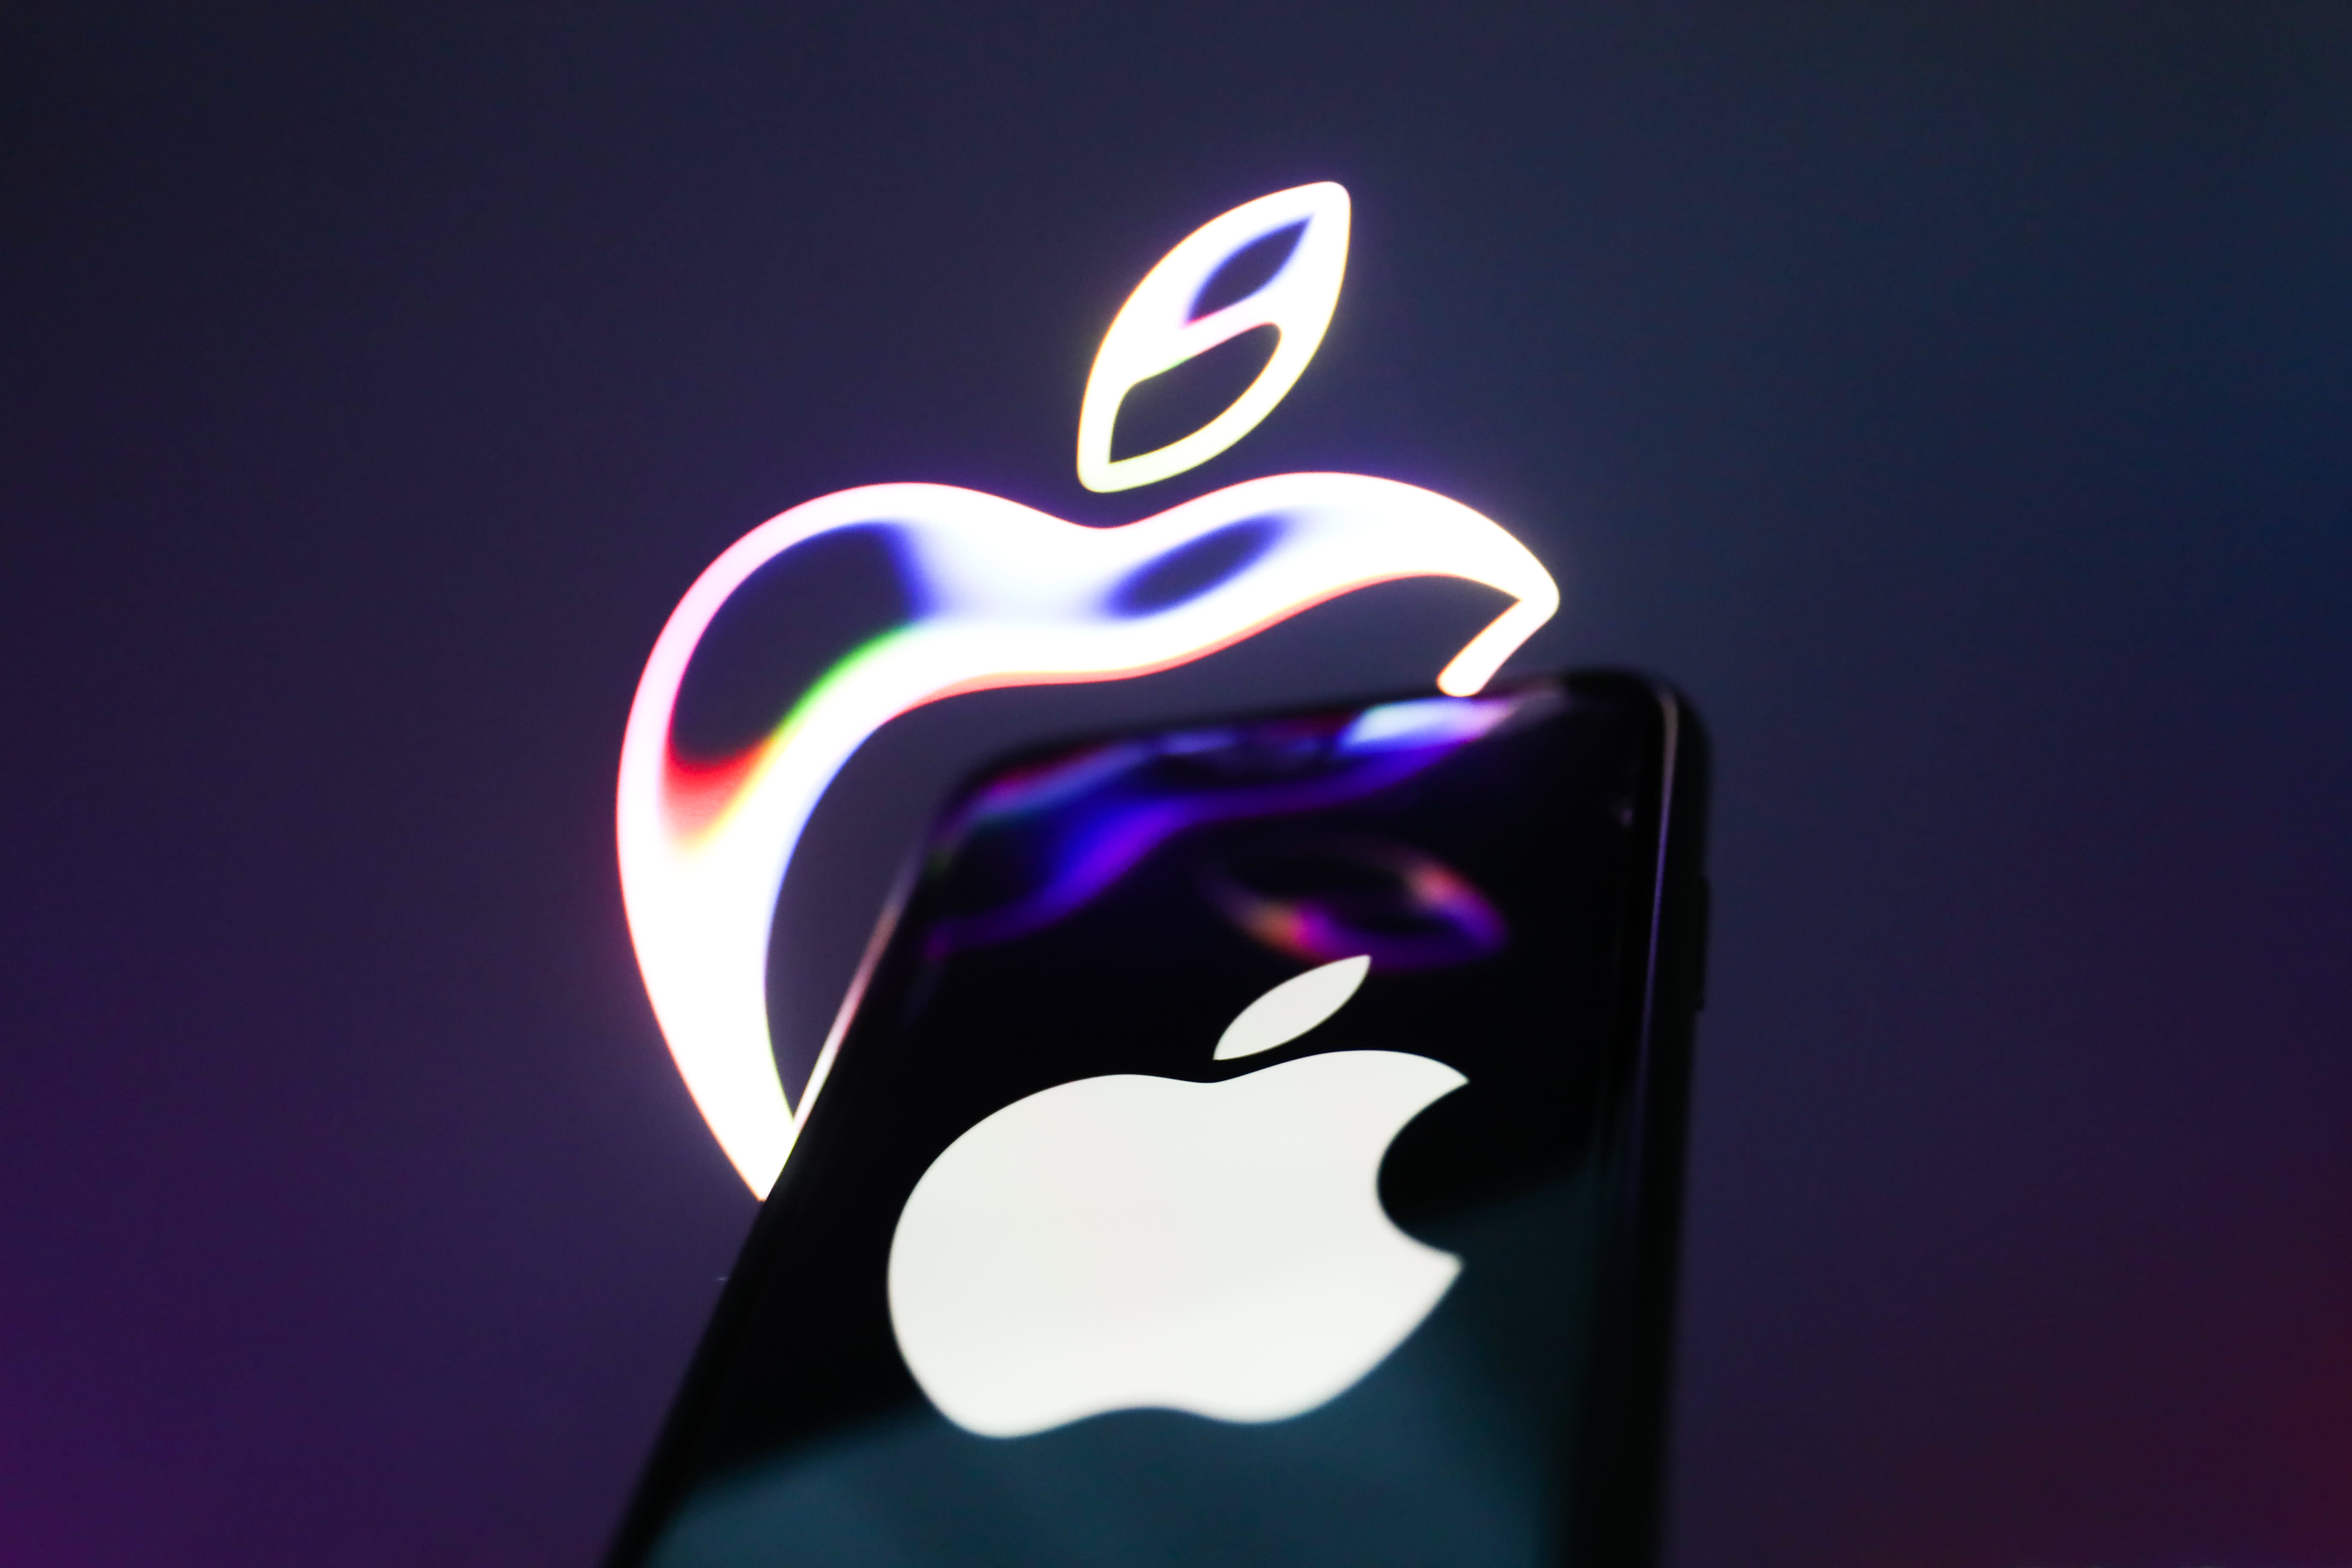 Wall Street misses the big picture on Apple by focusing on softer iPhone sales 